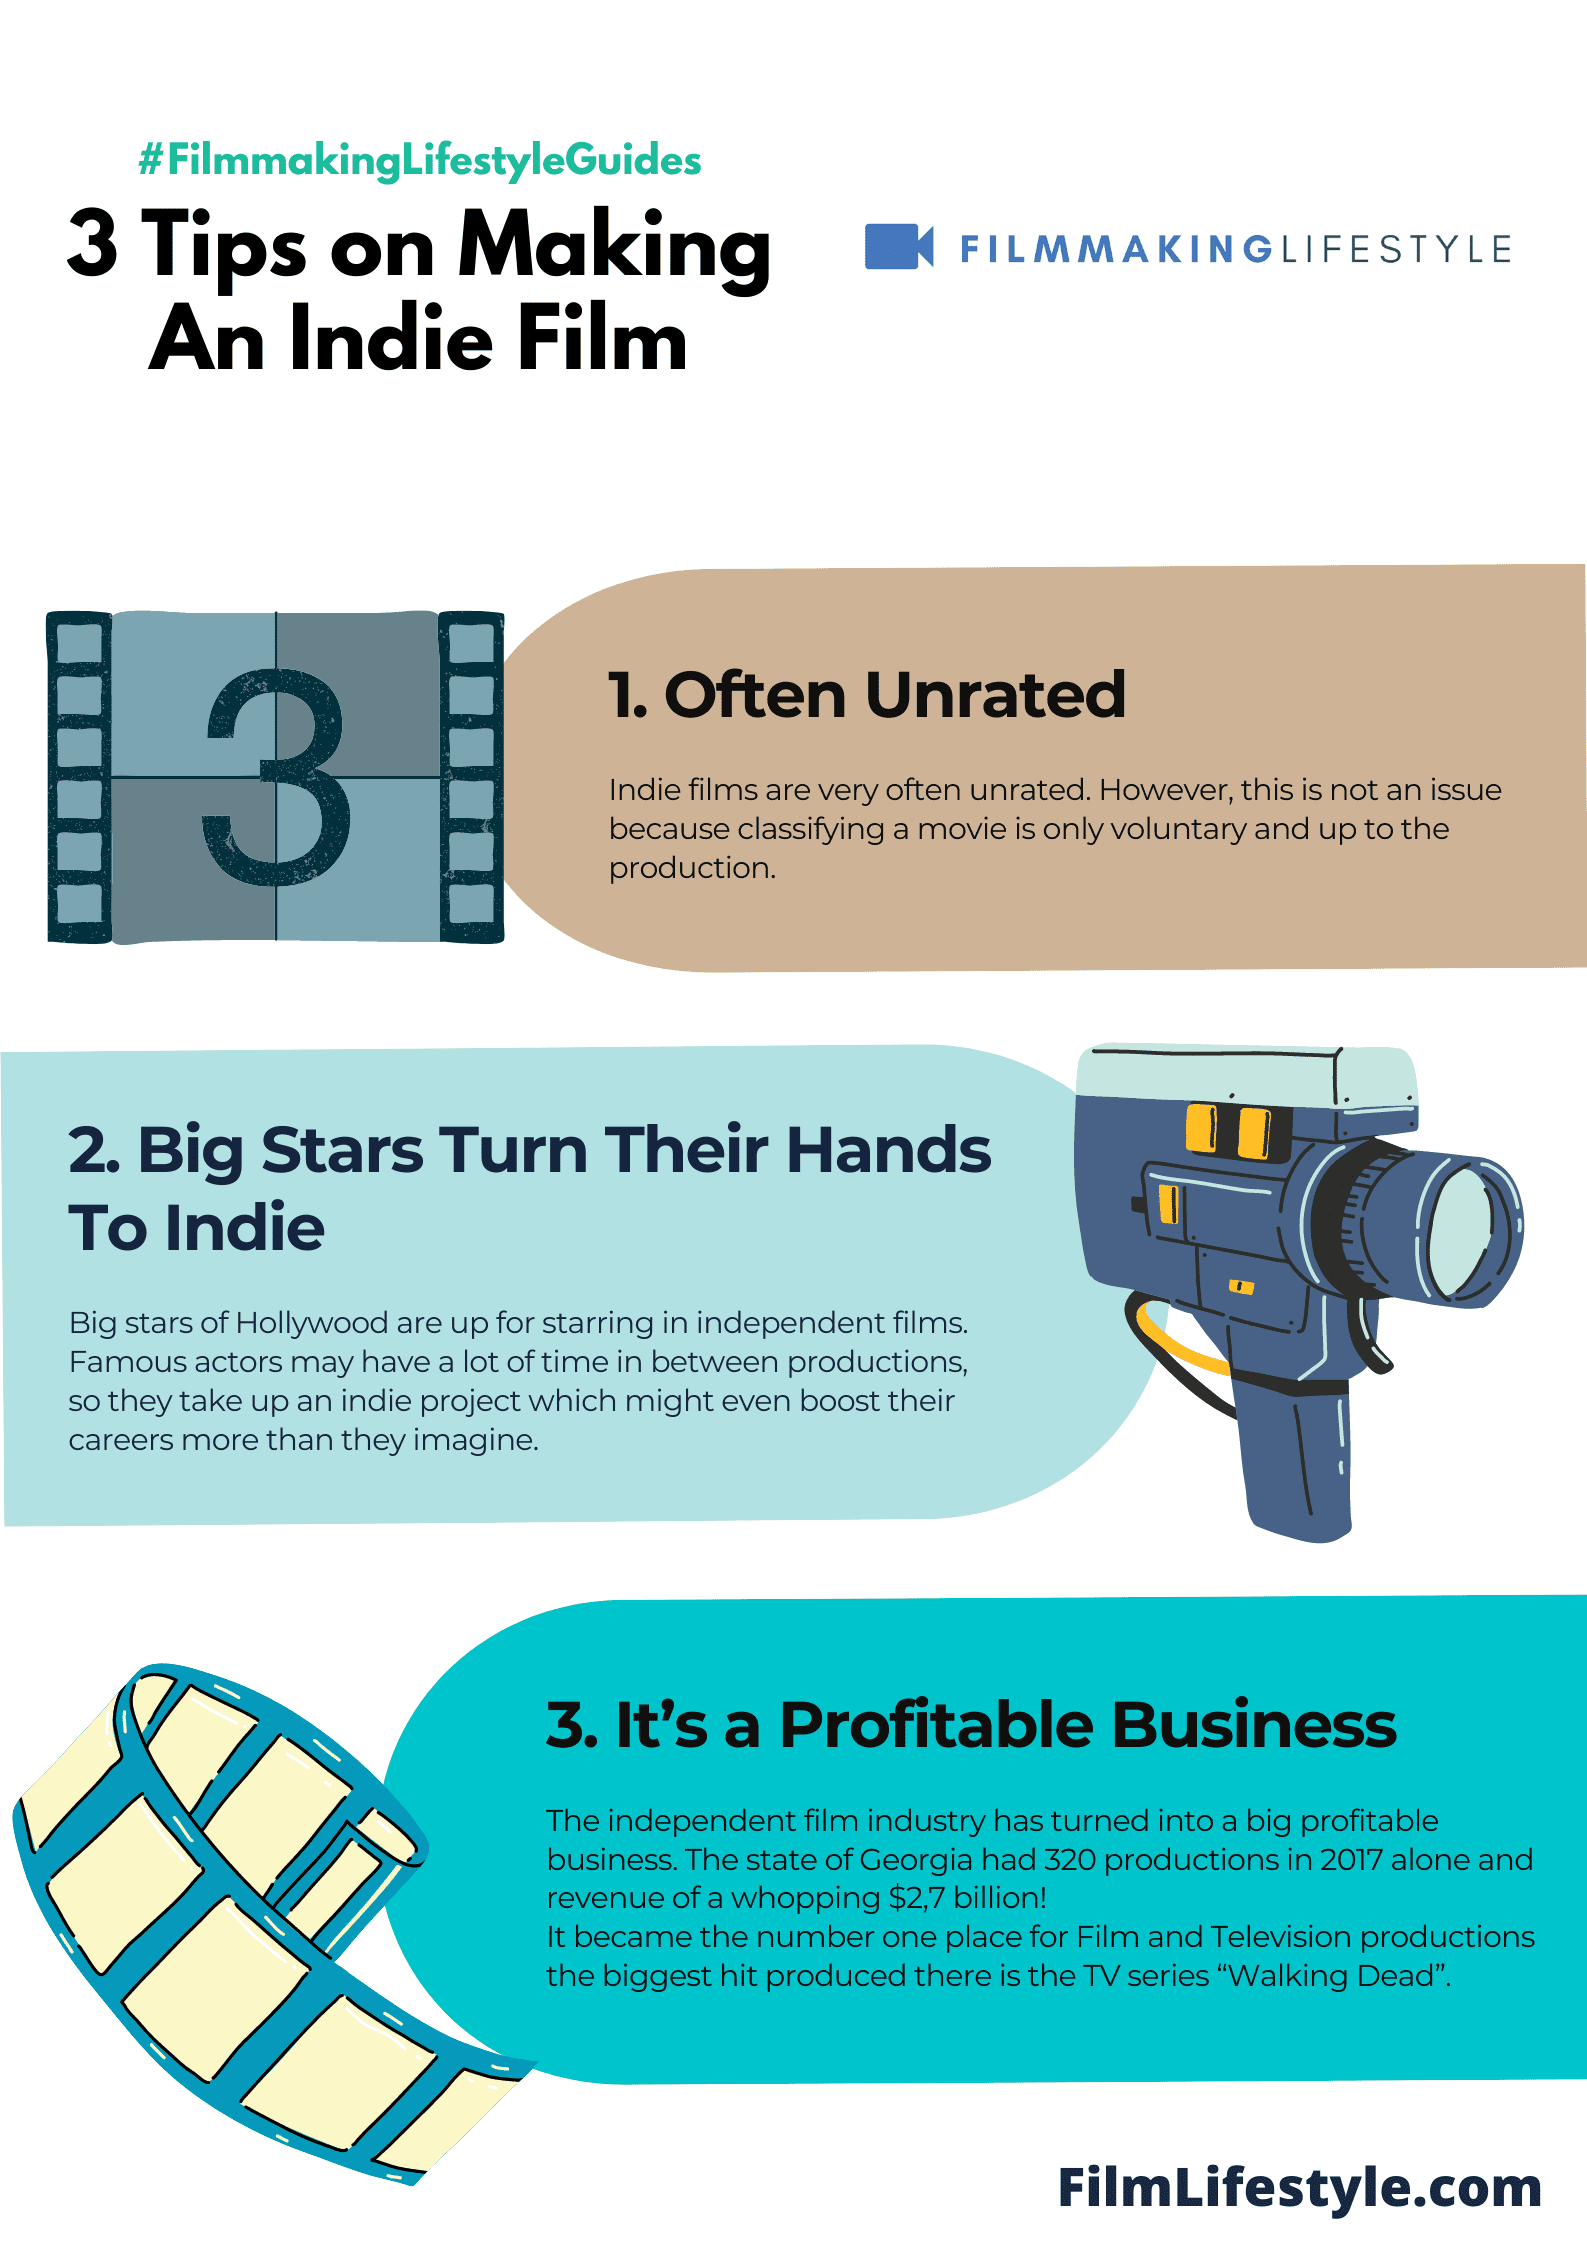 What Is An Indie Film